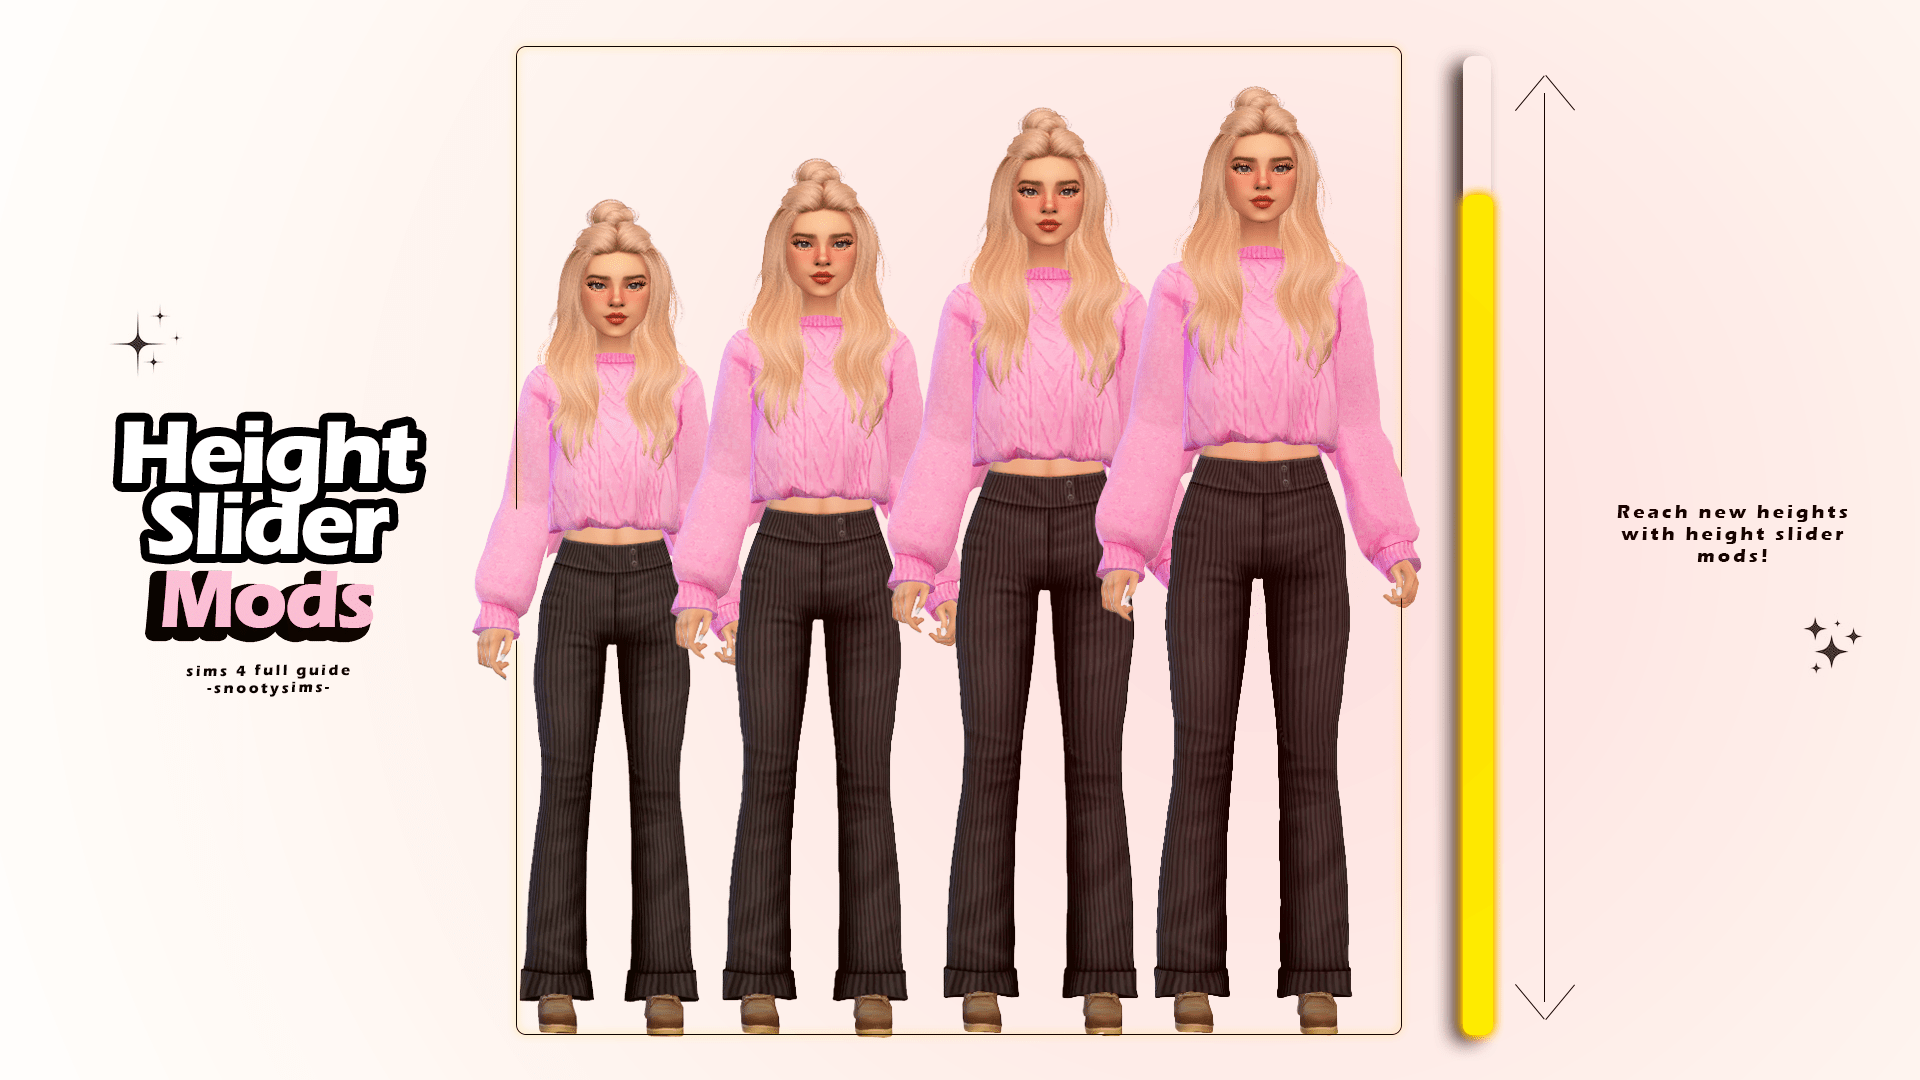 Height mod. SIMS 4 height Slider. Sliders SIMS 4 cc. SIMS 4 Sliders Mod. SIMS 4 belly Slider Mod.